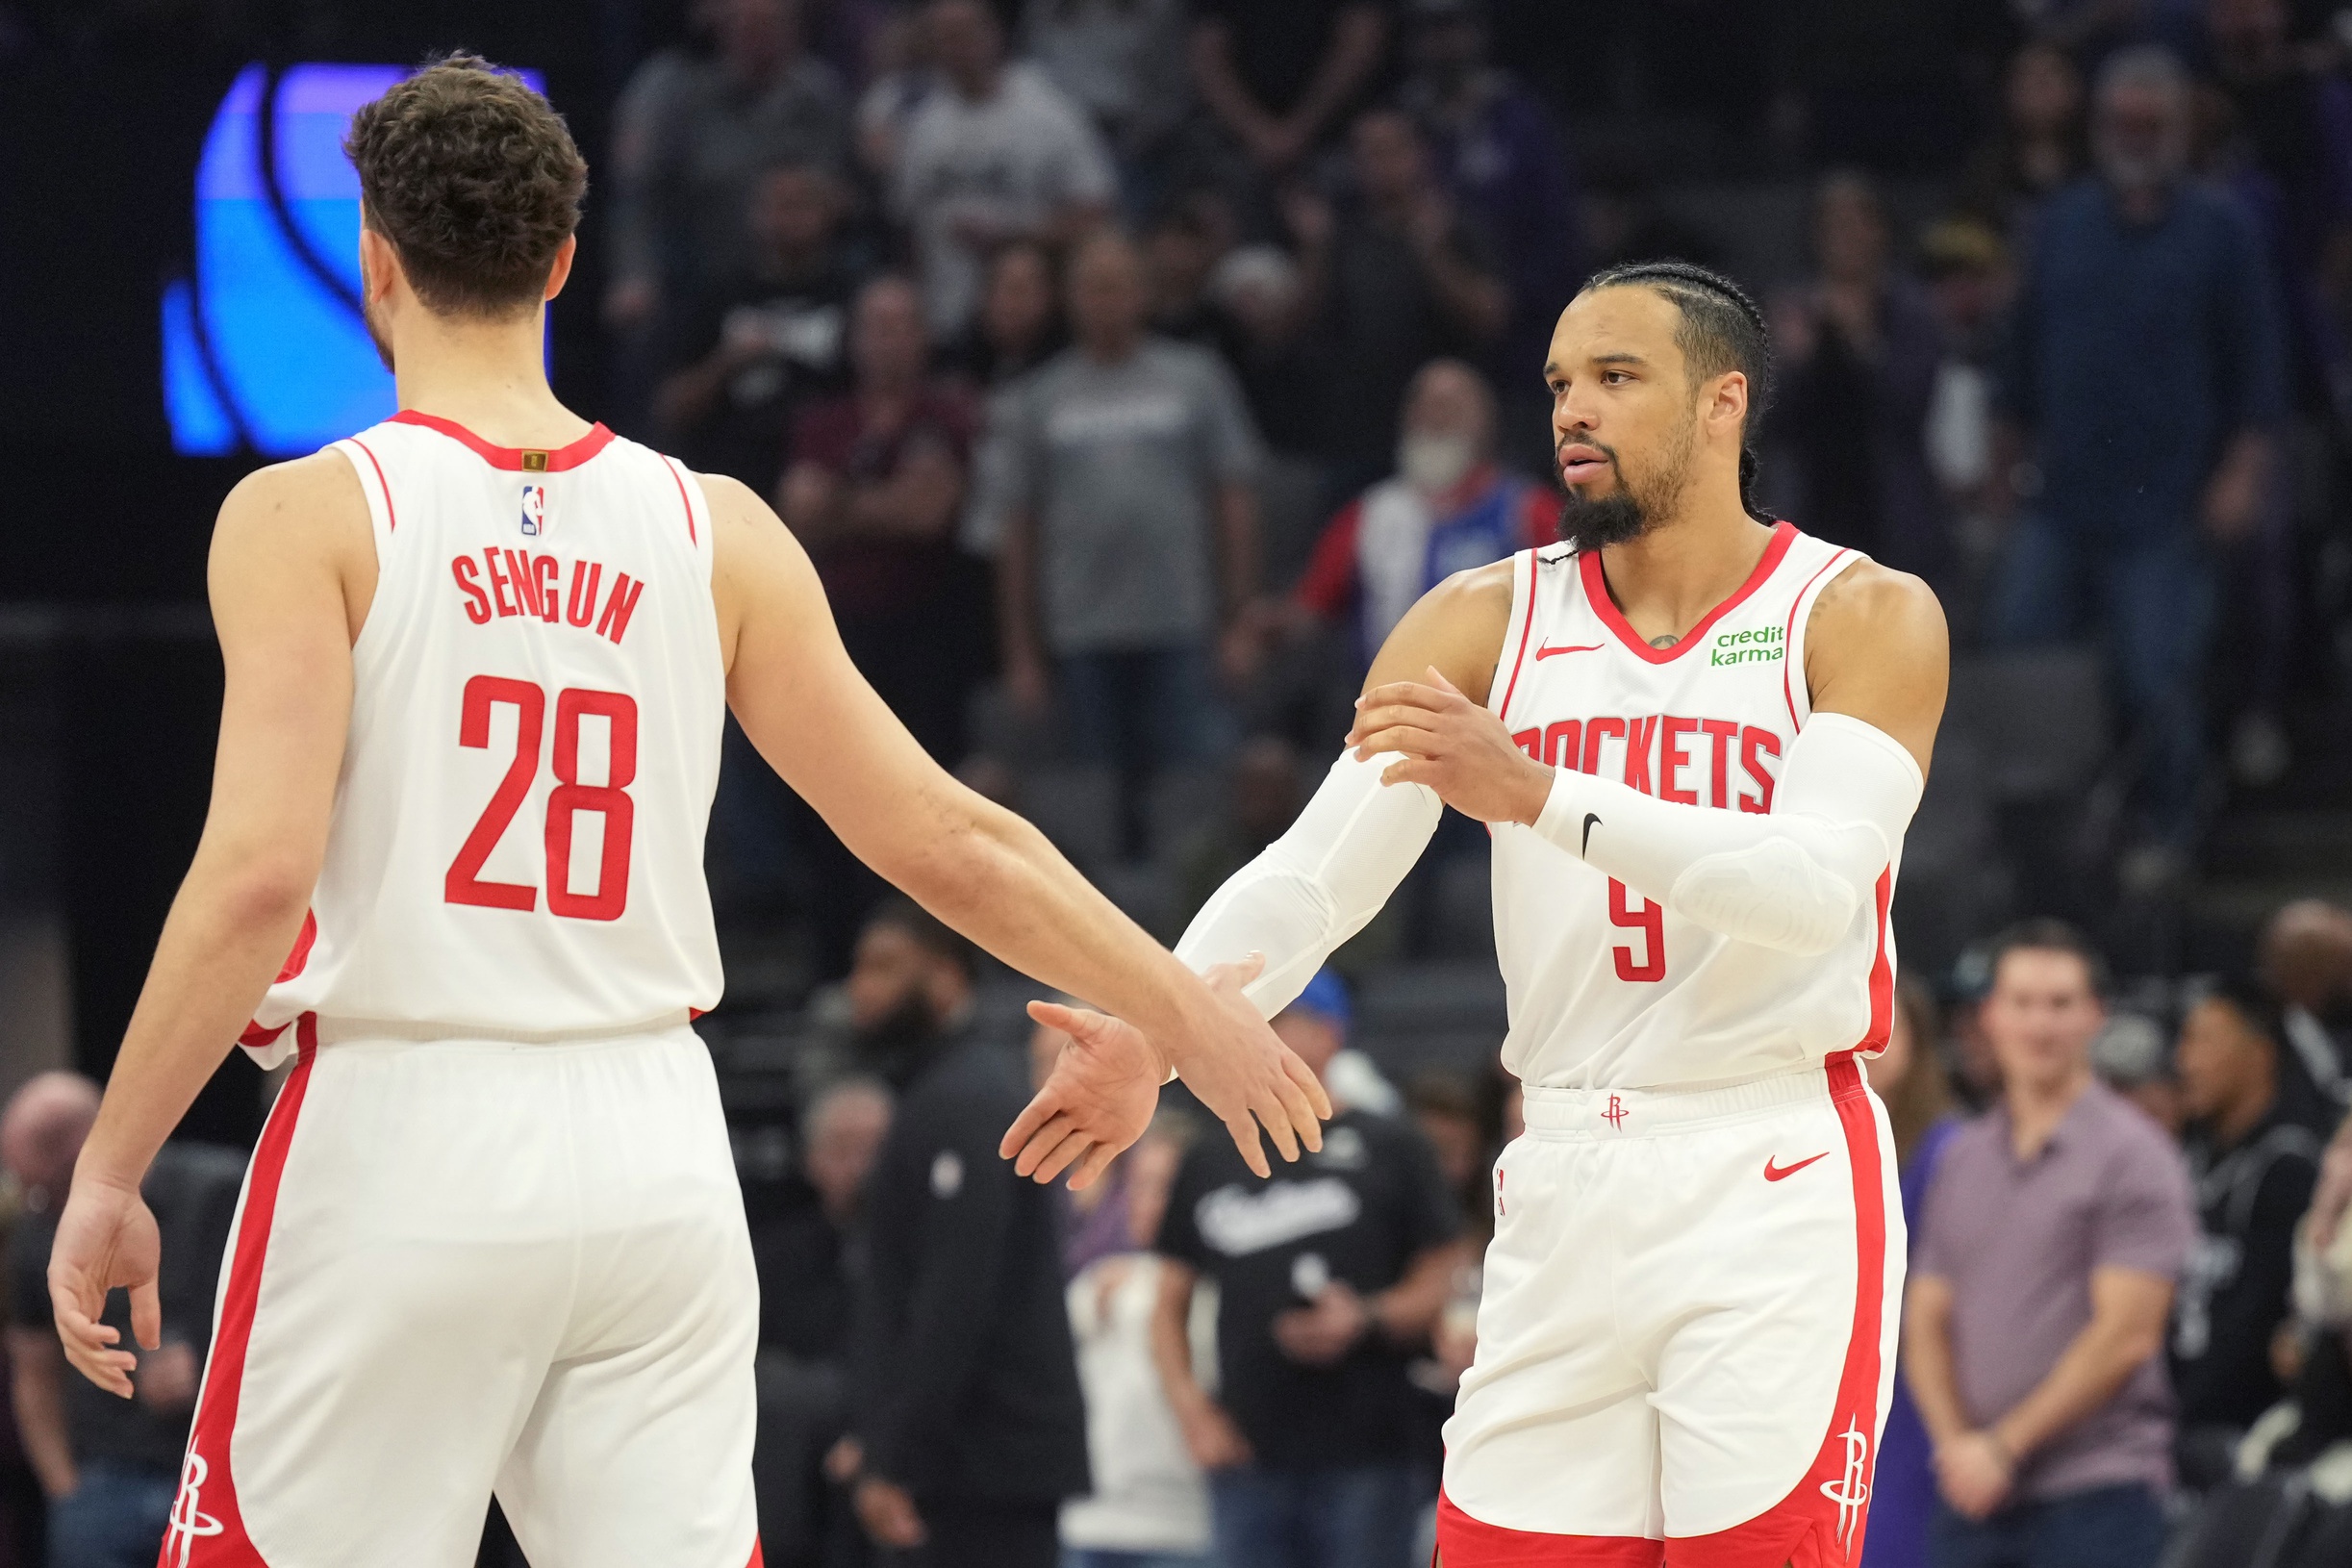 The Rockets are an intriguing team heading into the NBA offseason.